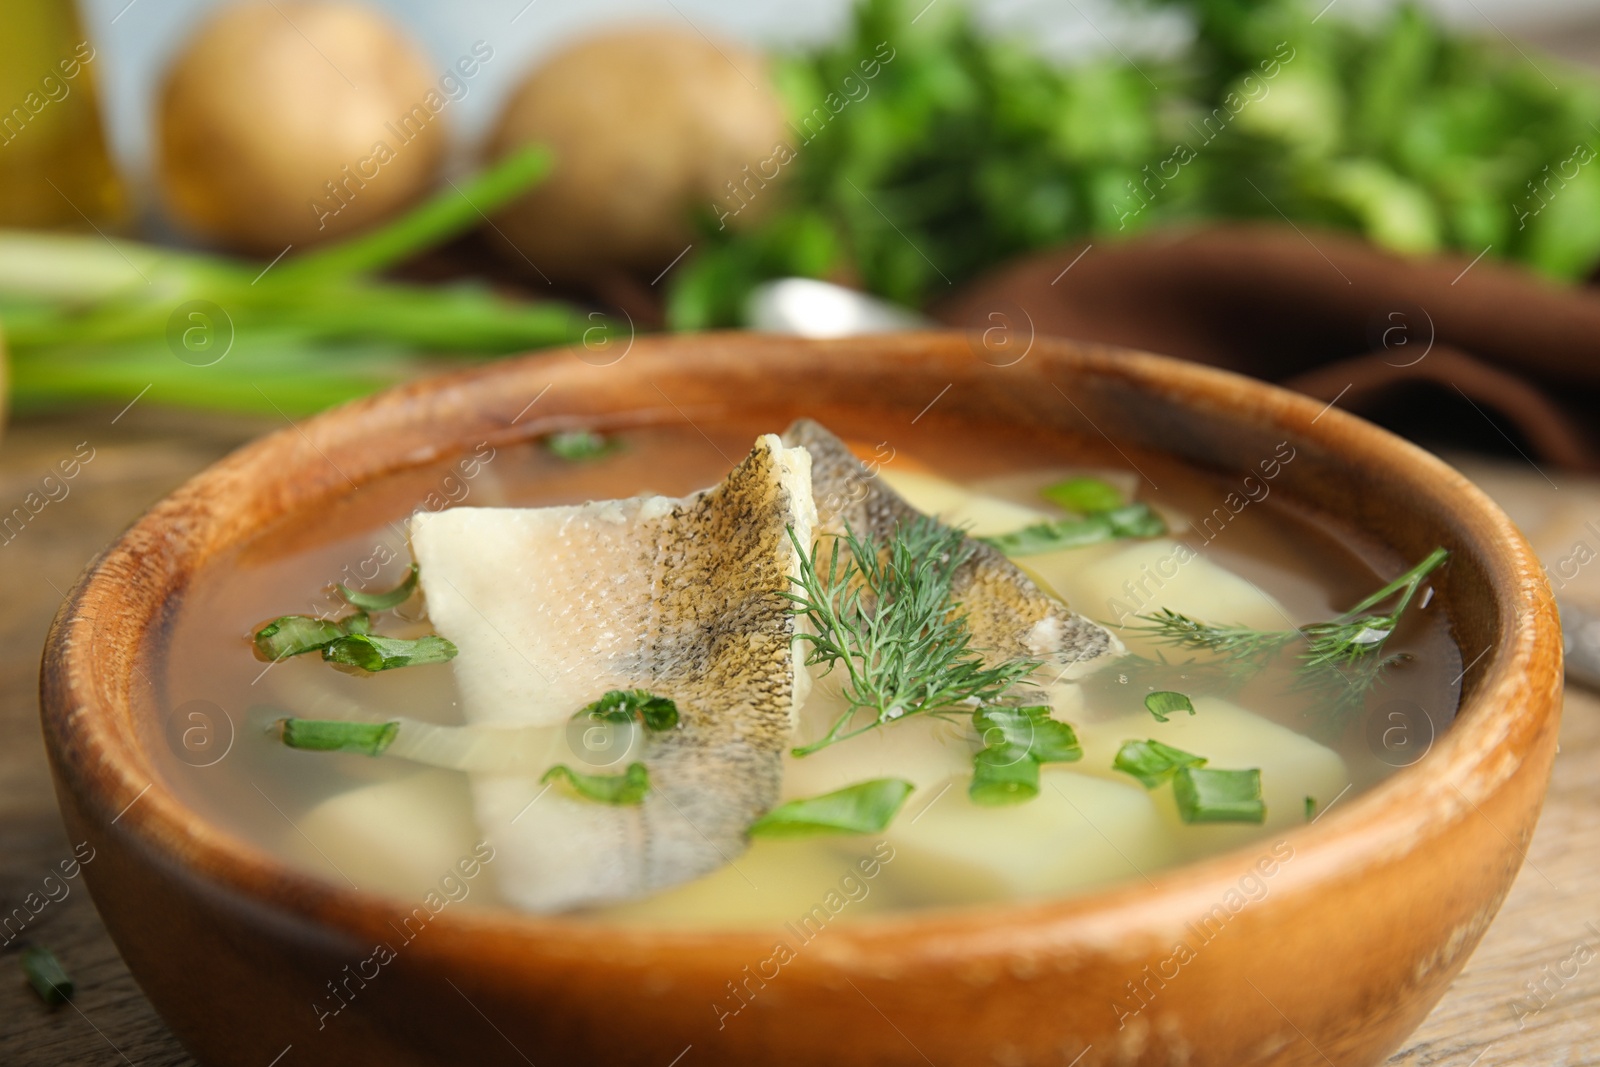 Photo of Delicious fish soup in bowl on table, closeup view